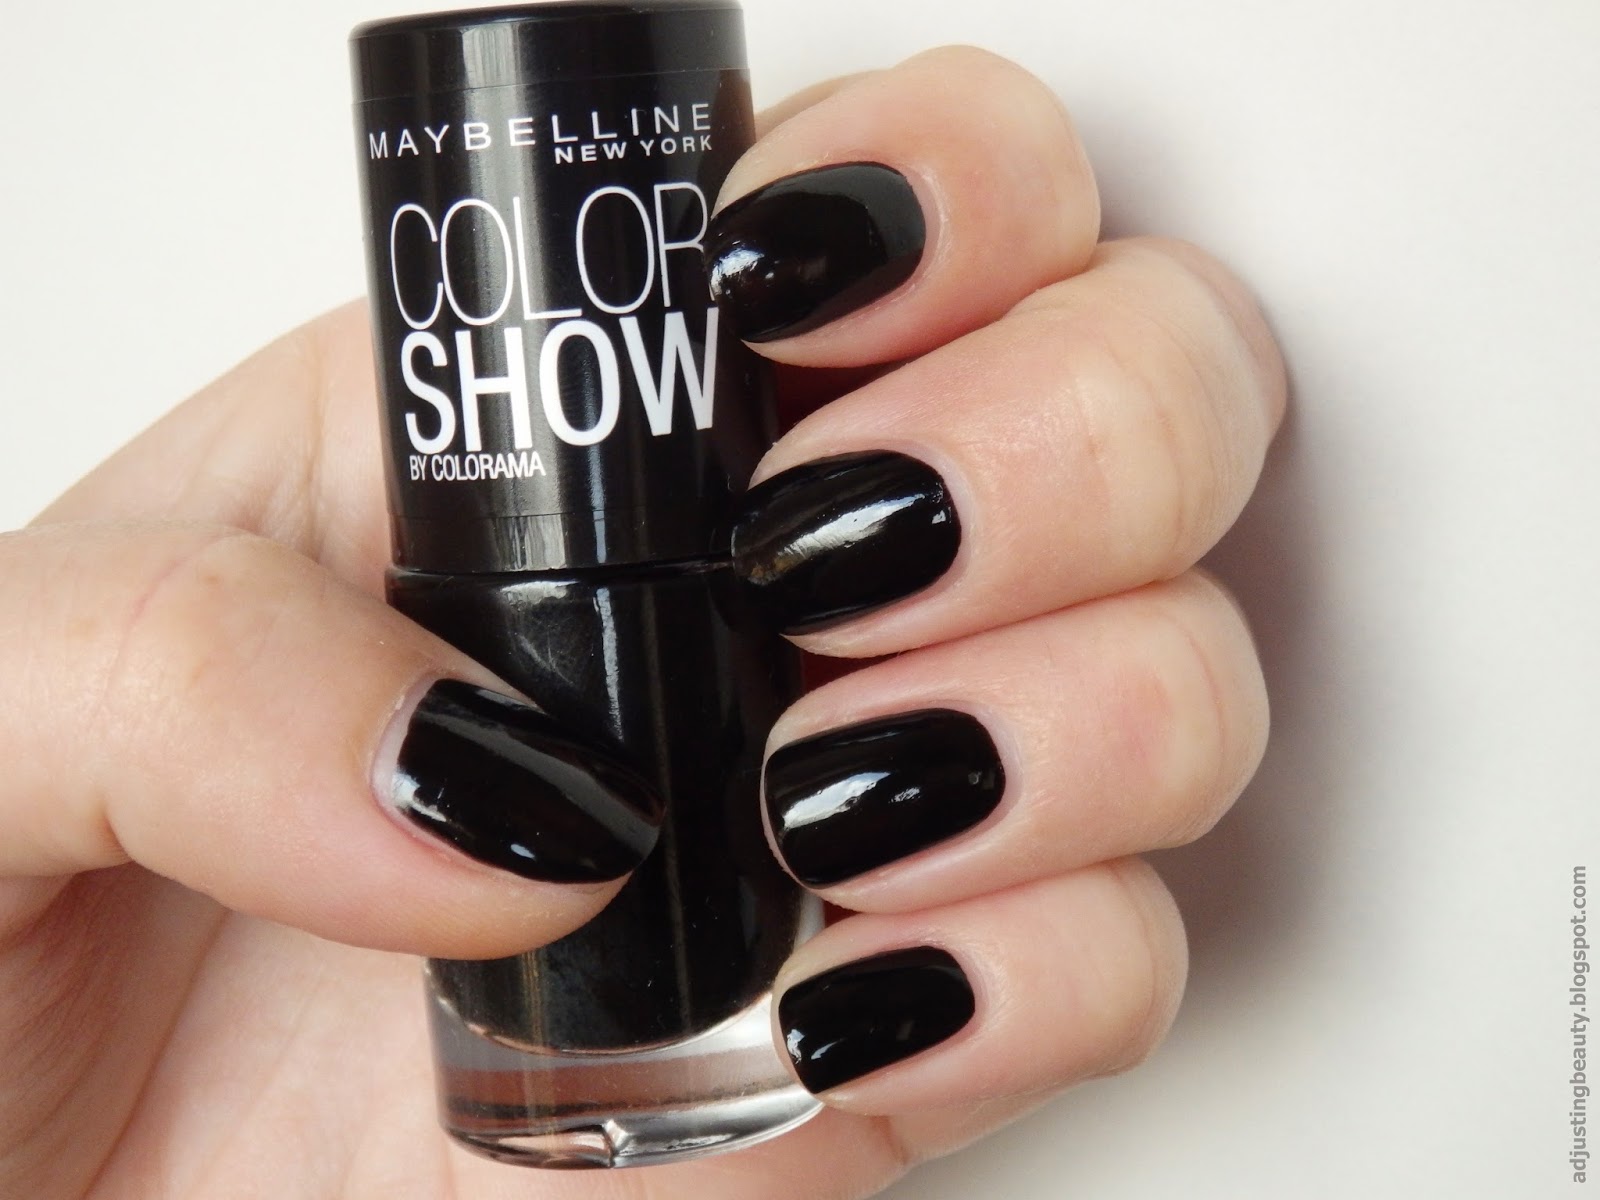 Maybelline Color Show Plum Paradise Nail Polish - wide 1